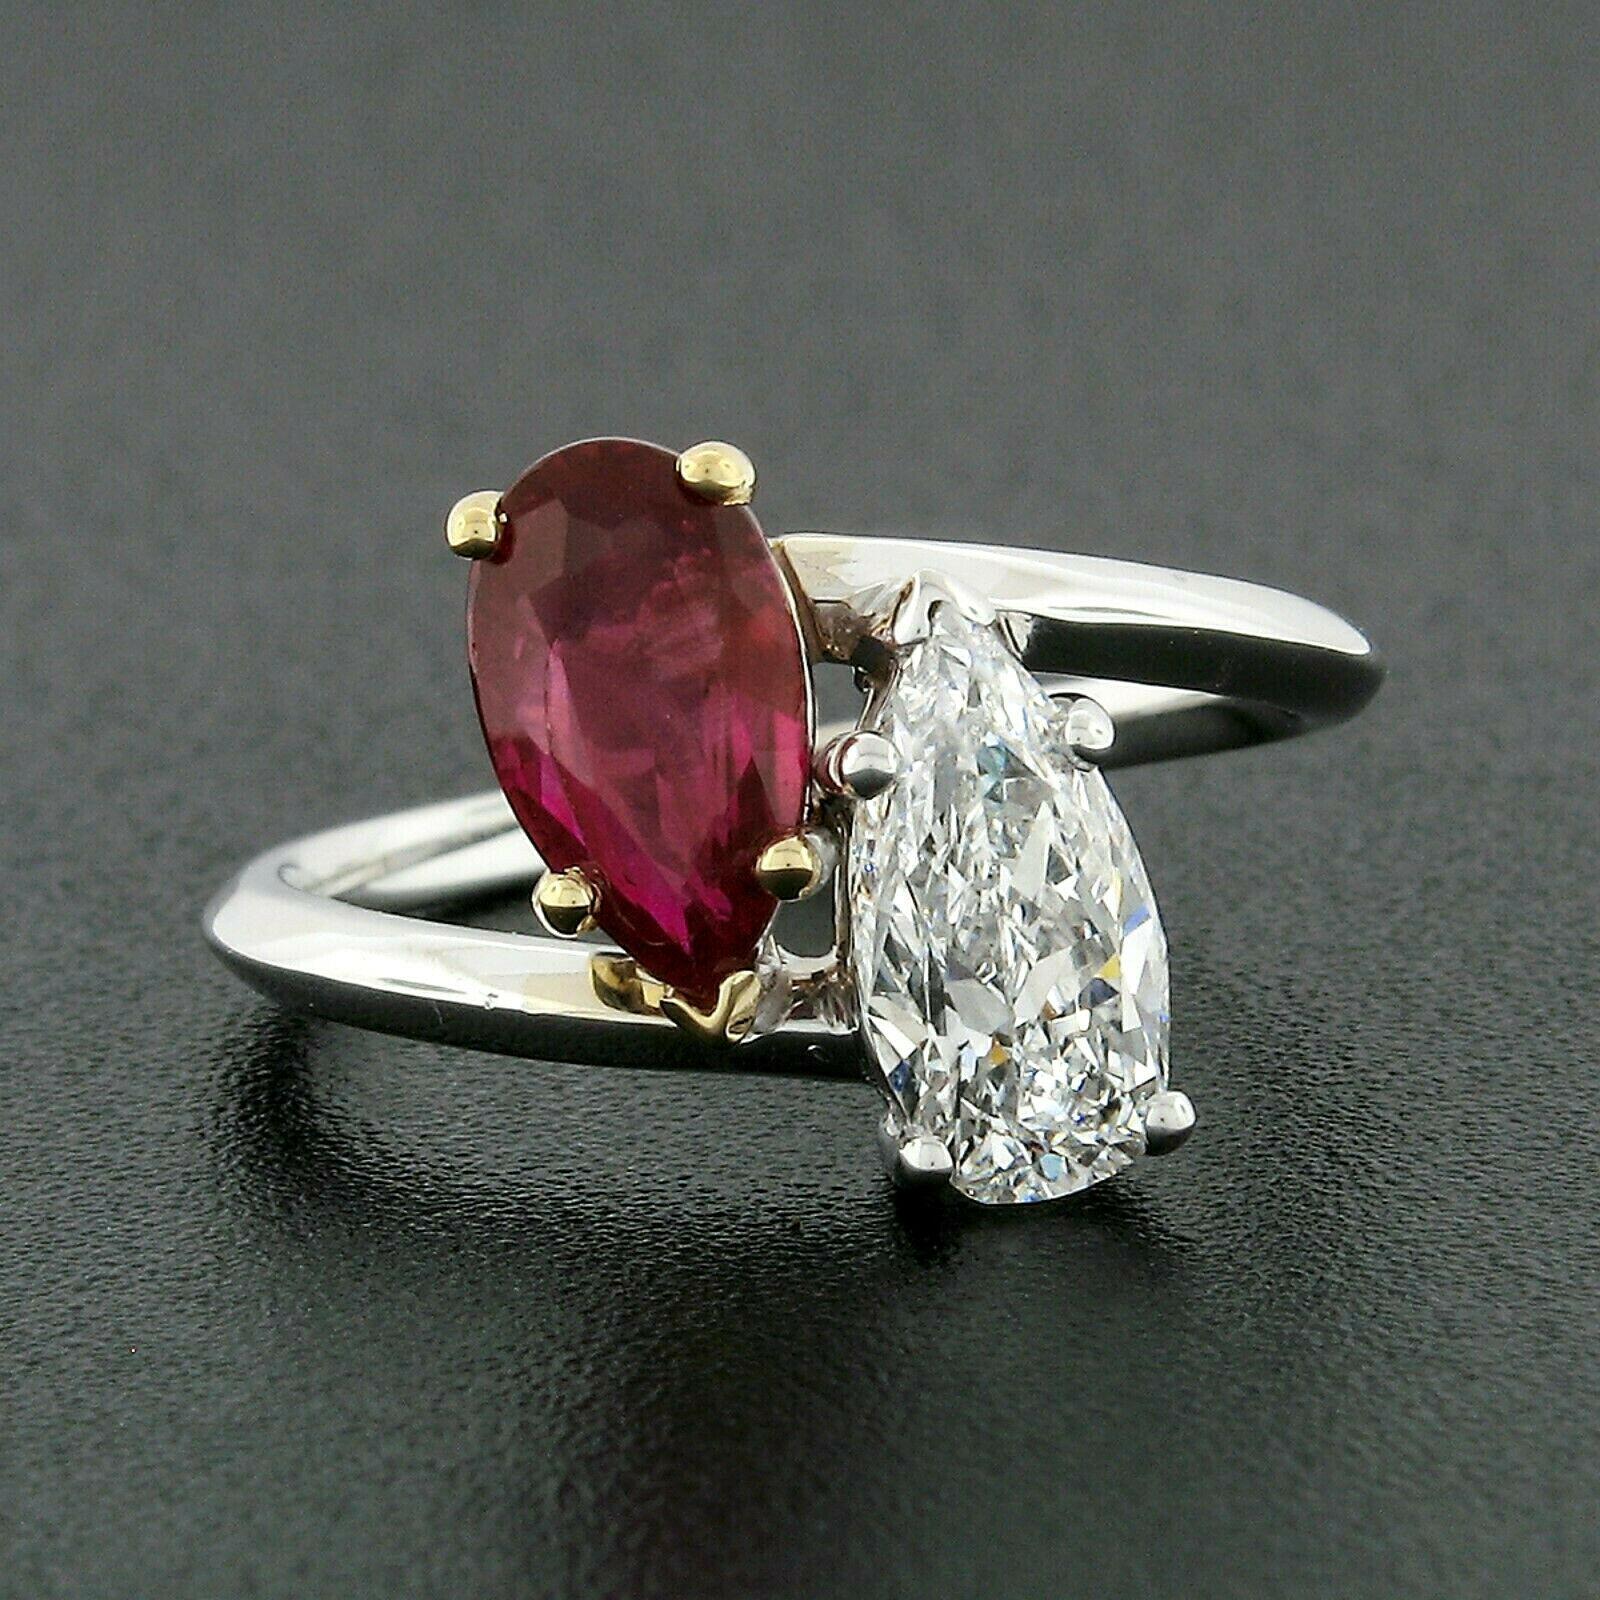 This very fine Moi et Toi bypass ring is solidly and neatly crafted in platinum and 18k yellow gold. It features both GIA certified pear brilliant ruby and old pear cut diamond, prong set at each end of the bypass design. The amazingly ruby stone